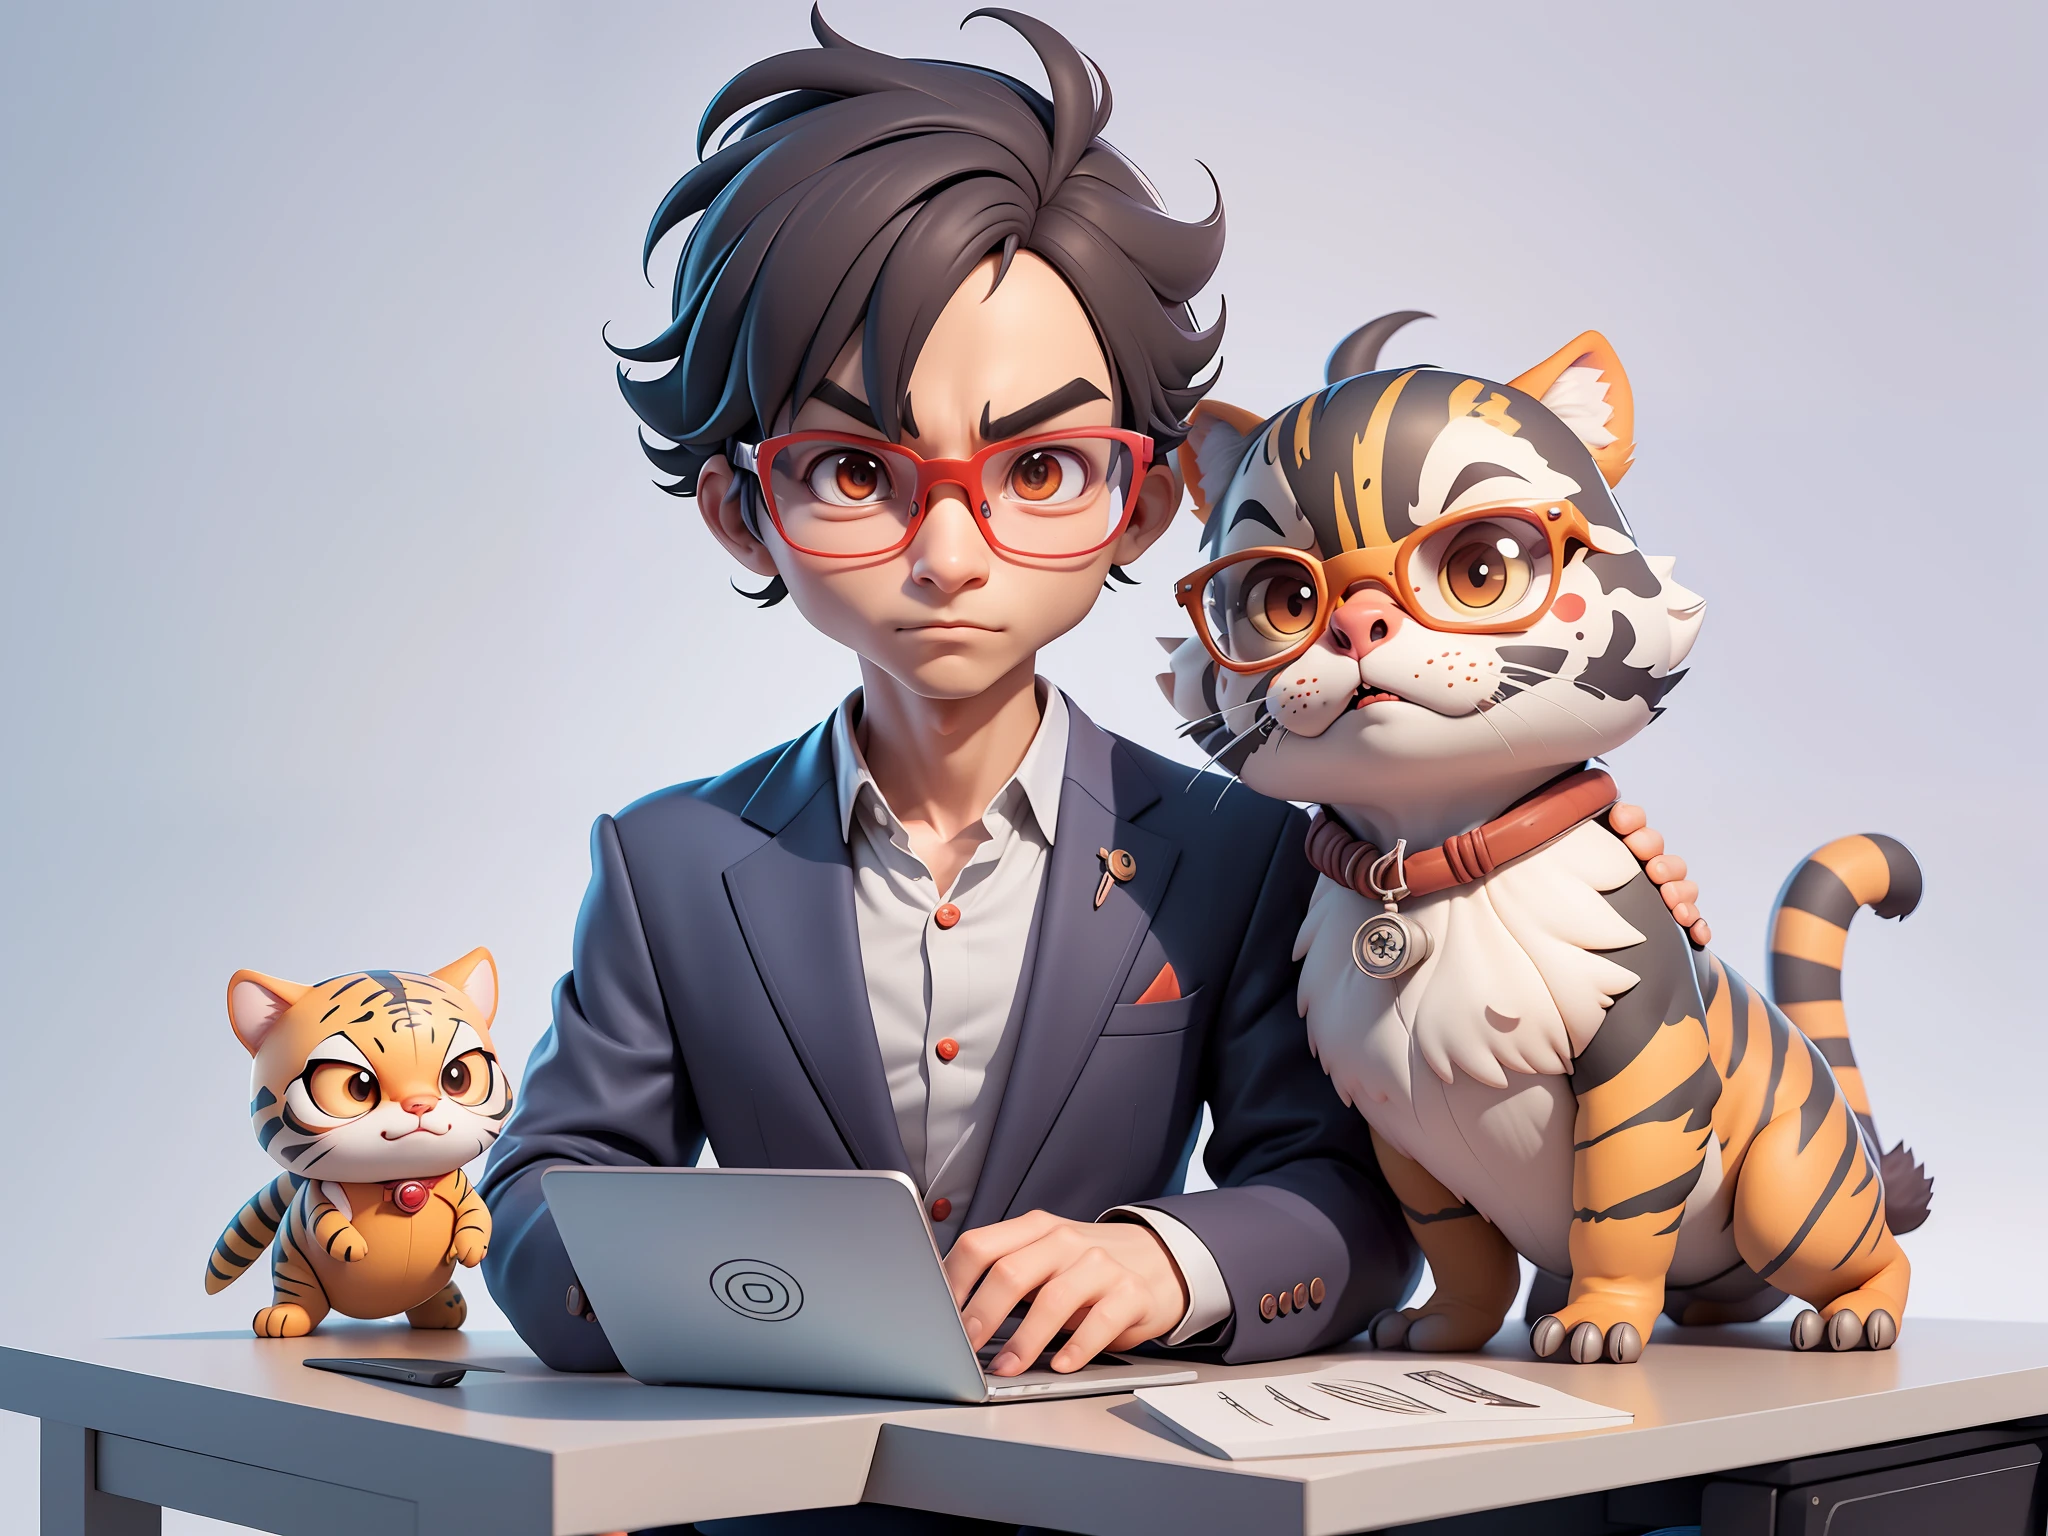 A young man in a suit, Short hair and glasses sat at his desk，holding laptop，digitial painting，tigre，3D character design by Mark Clairen and Pixar and Hayao Miyazaki and Akira Toriyama，4K HD illustration，Very detailed facial features and cartoon-style visuals。